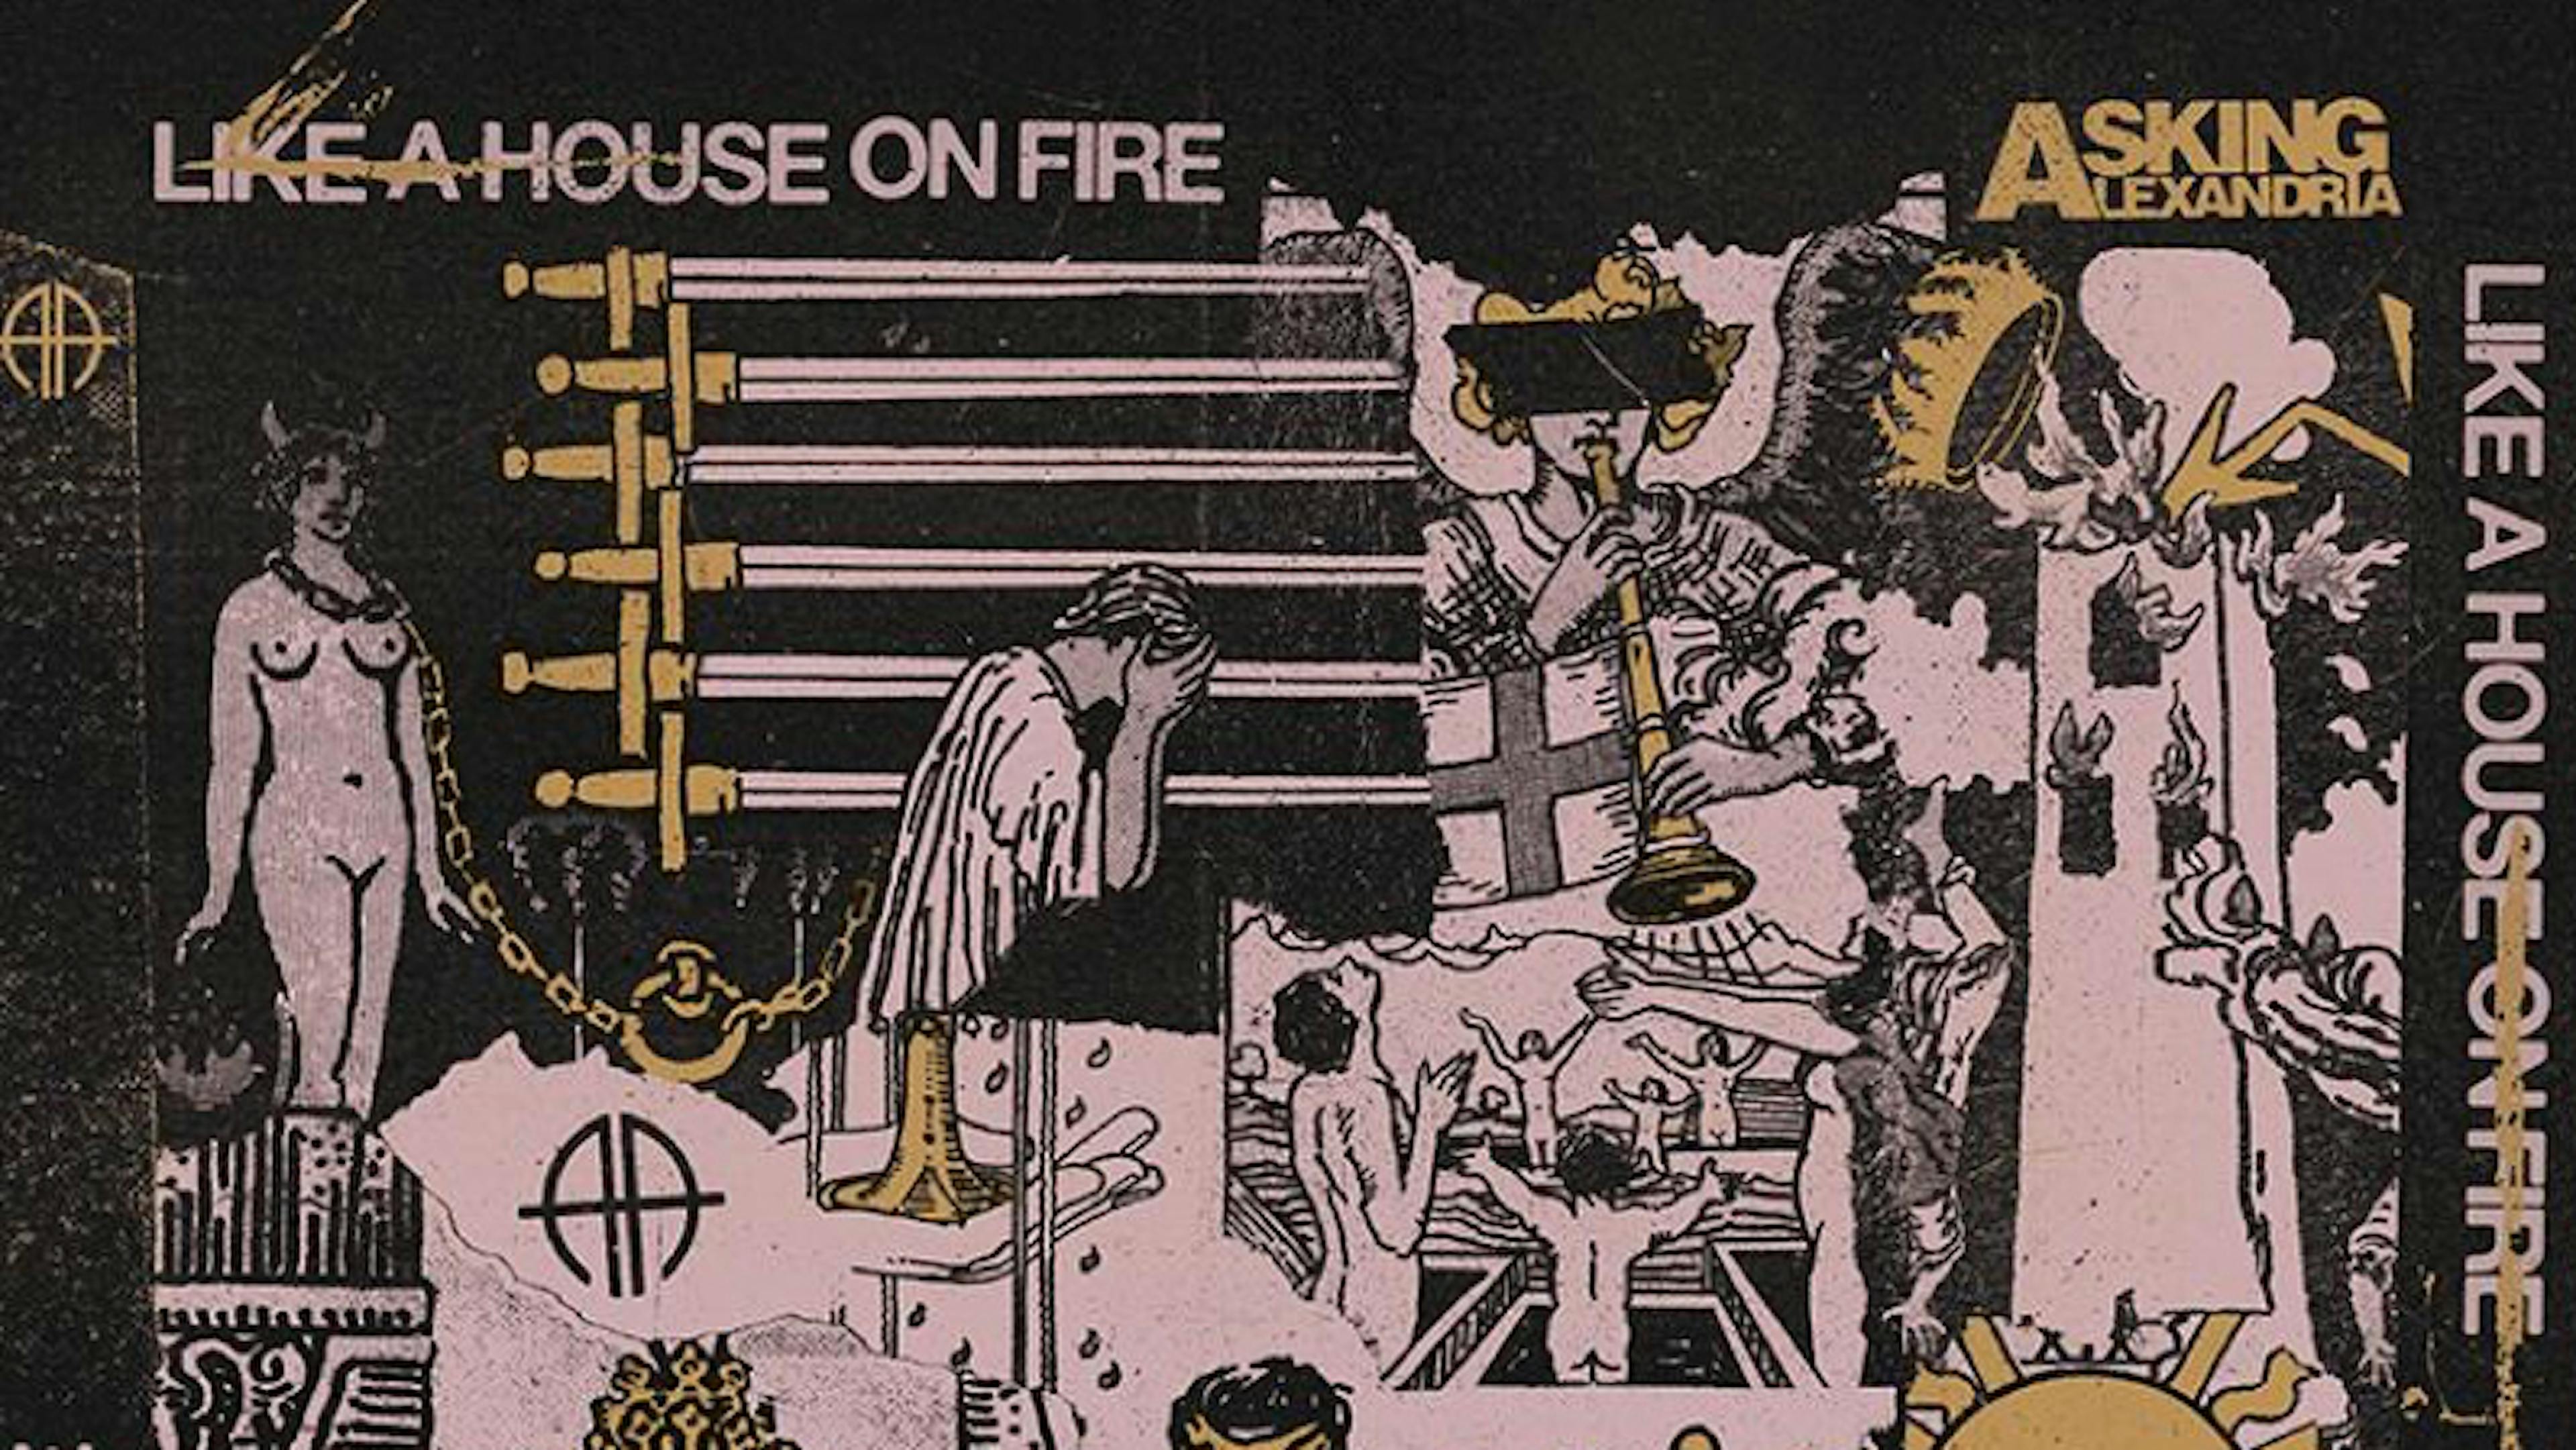 Album Review: Asking Alexandria – Like A House On Fire